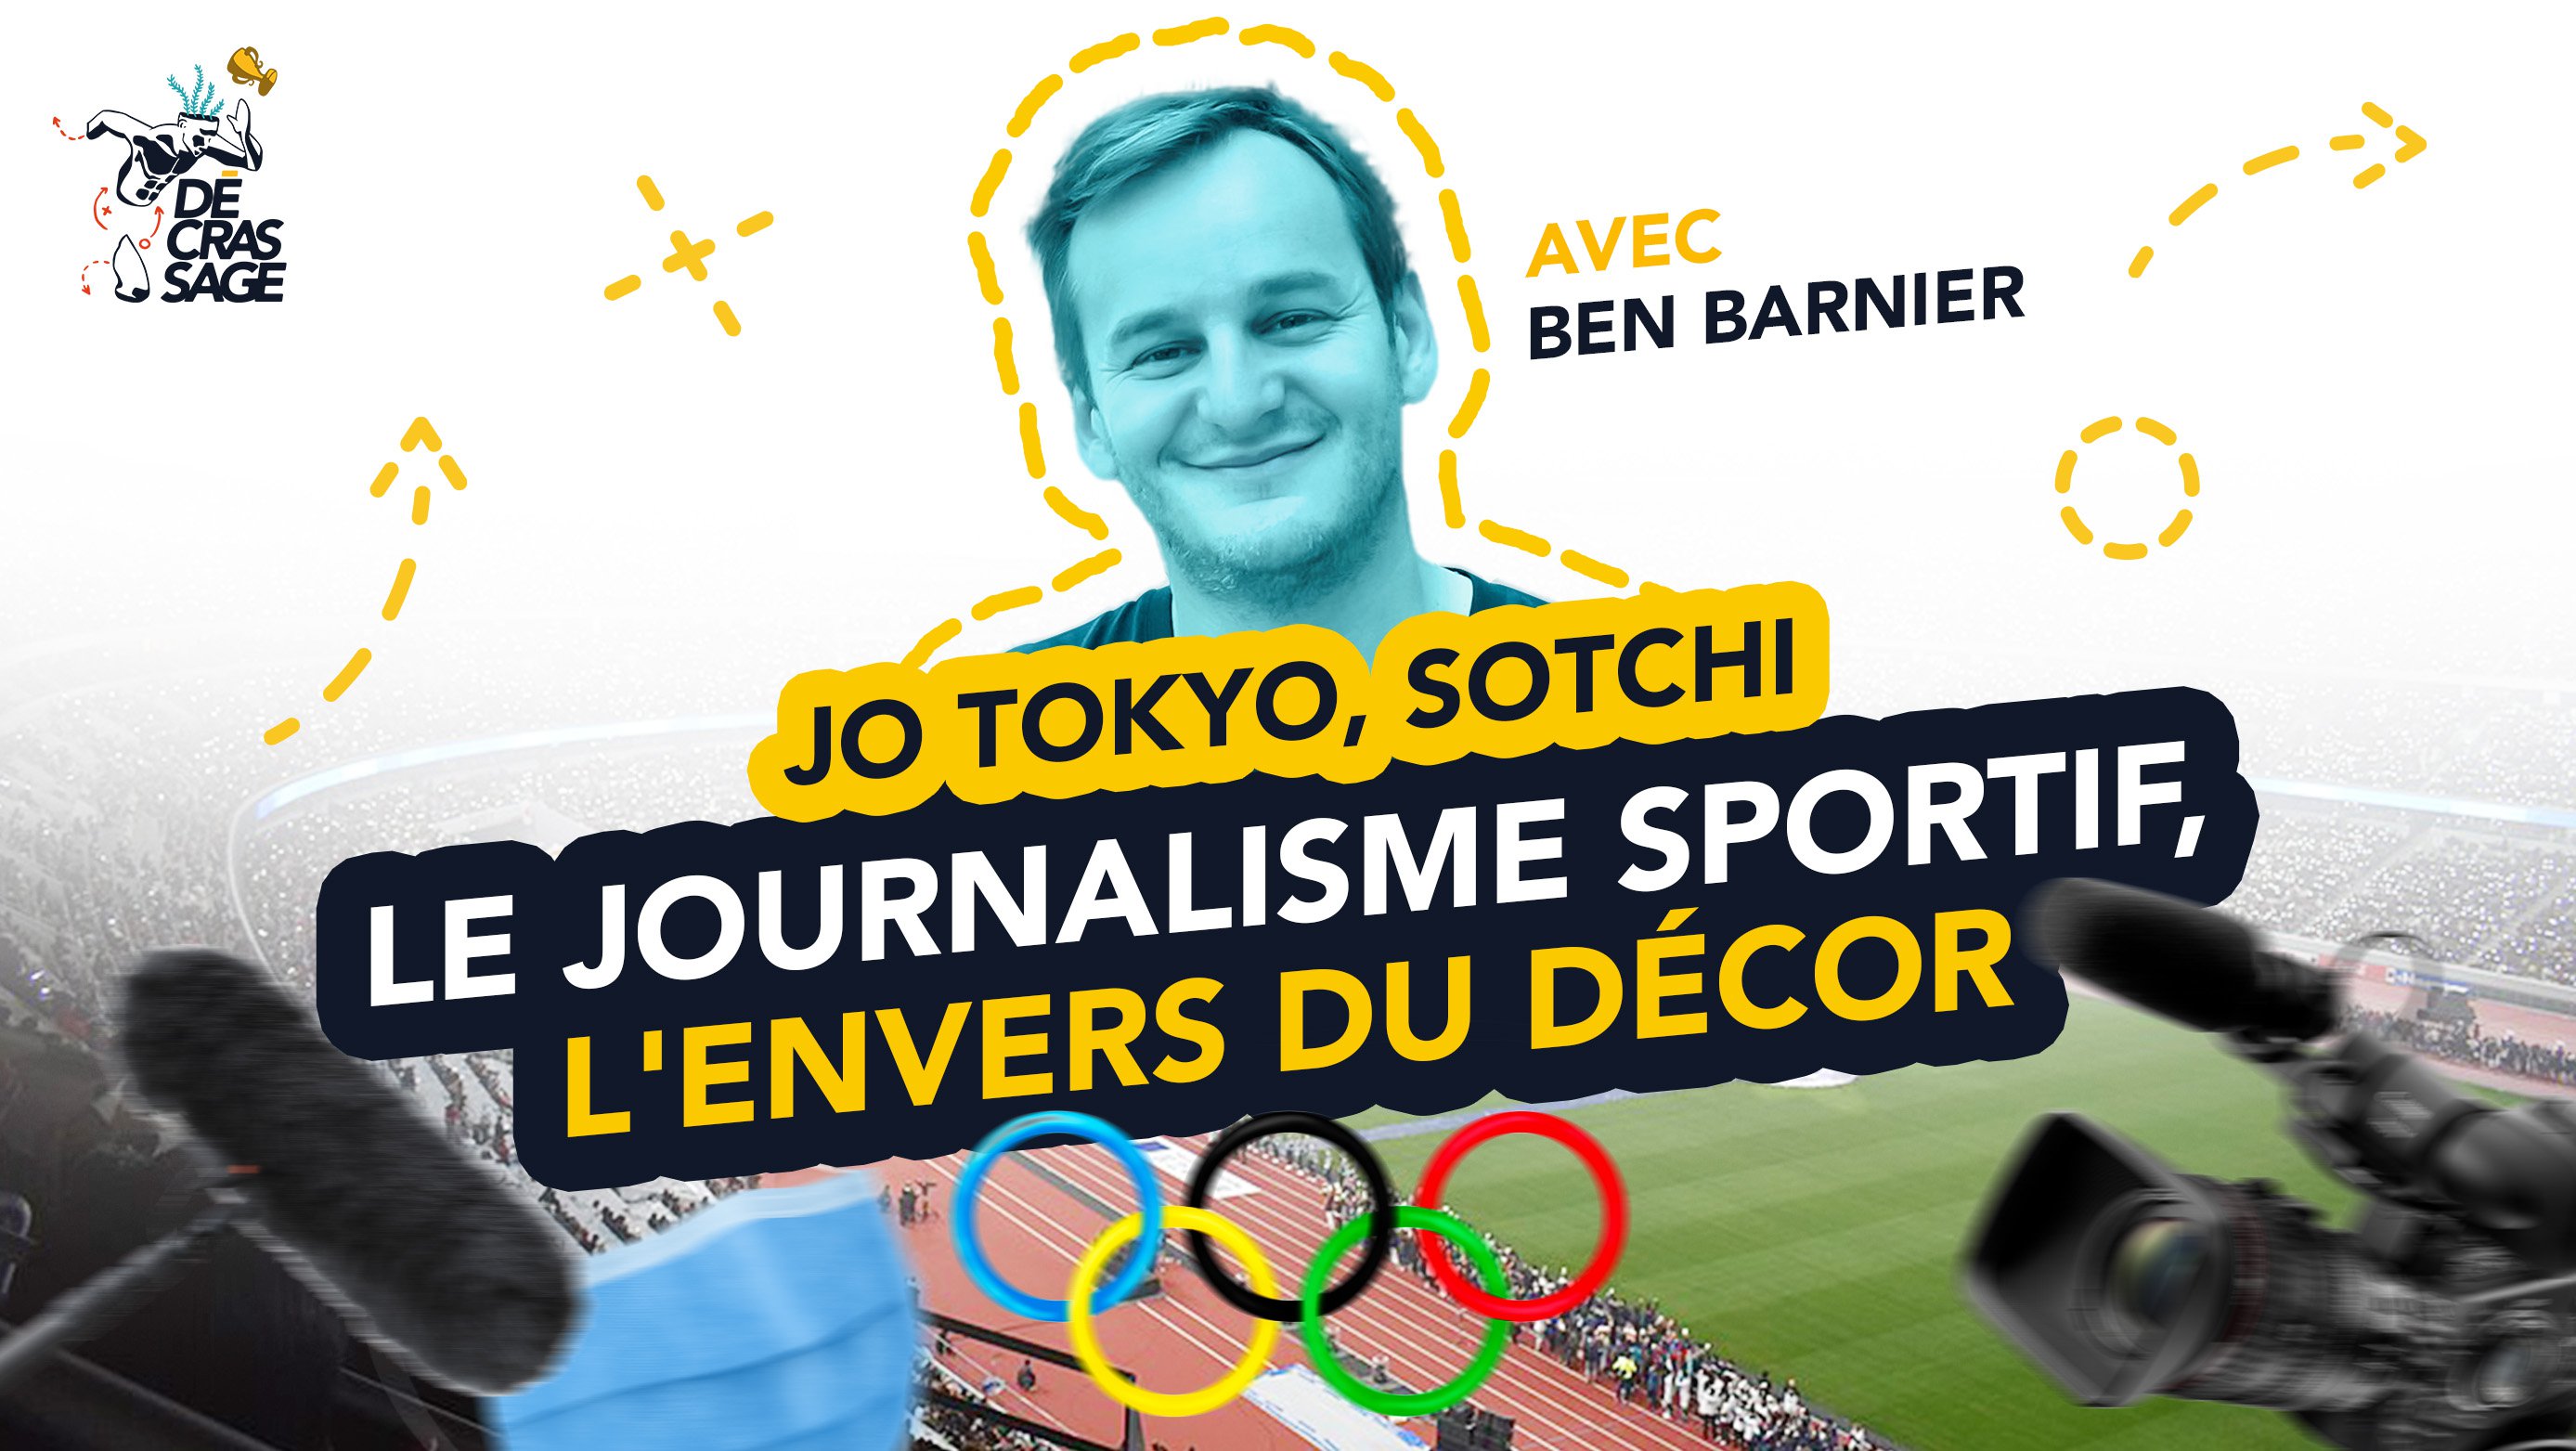 Tokyo Olympics, Sochi: Sports journalism and behind the scenes